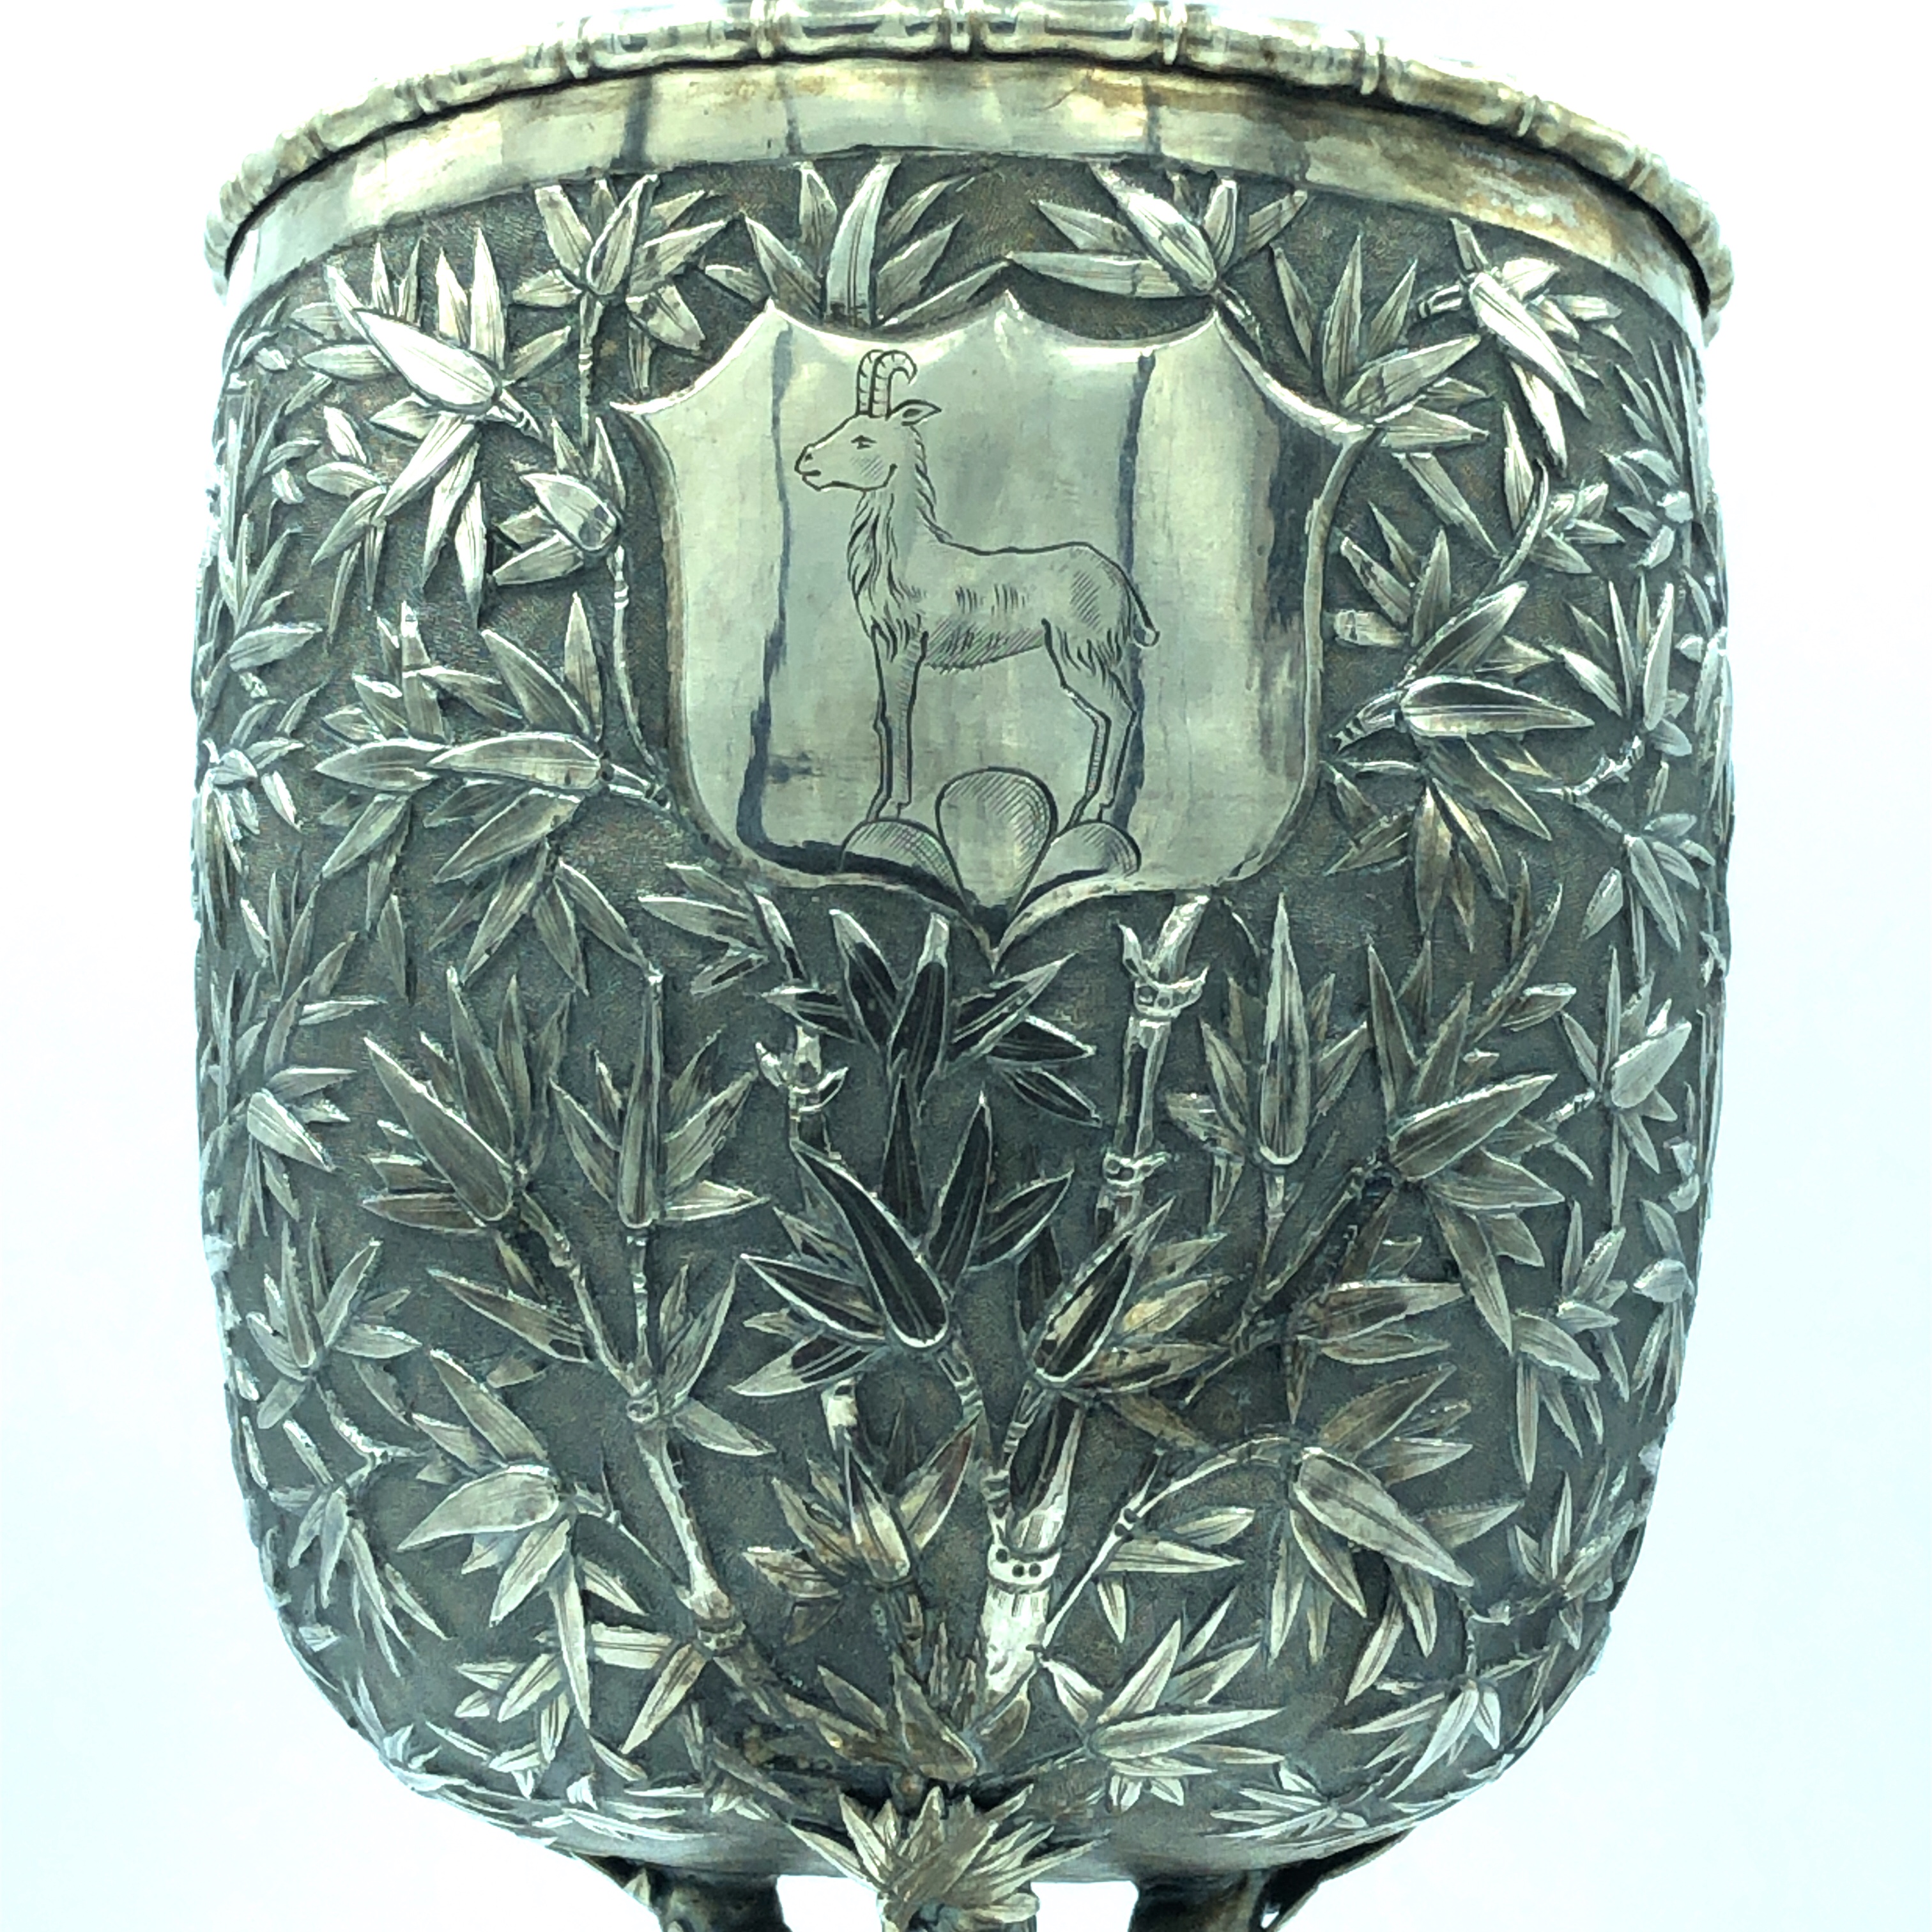 Set of Six Very Important Silver Chinese Goblets, Late 19th Century - Image 6 of 6